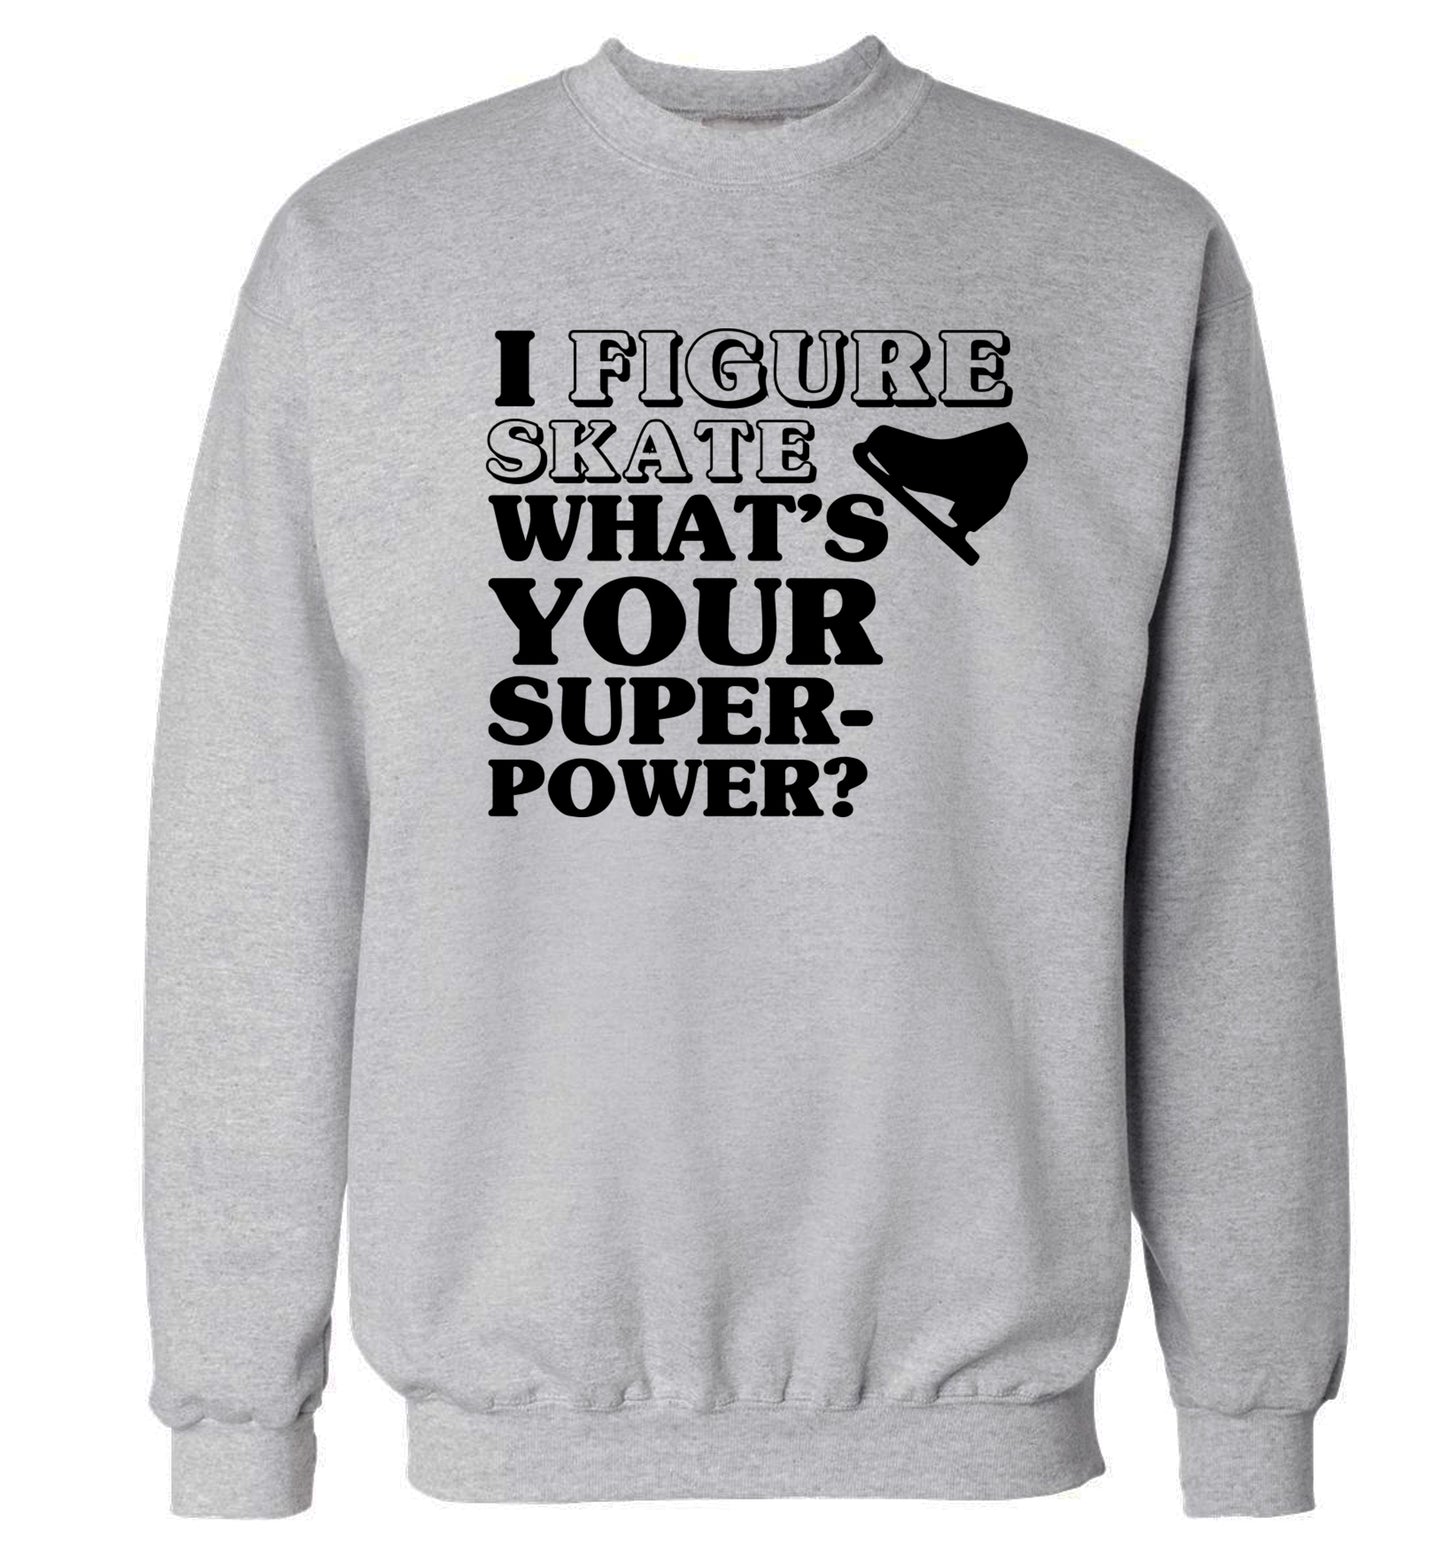 I figure skate what's your superpower? Adult's unisexgrey Sweater 2XL